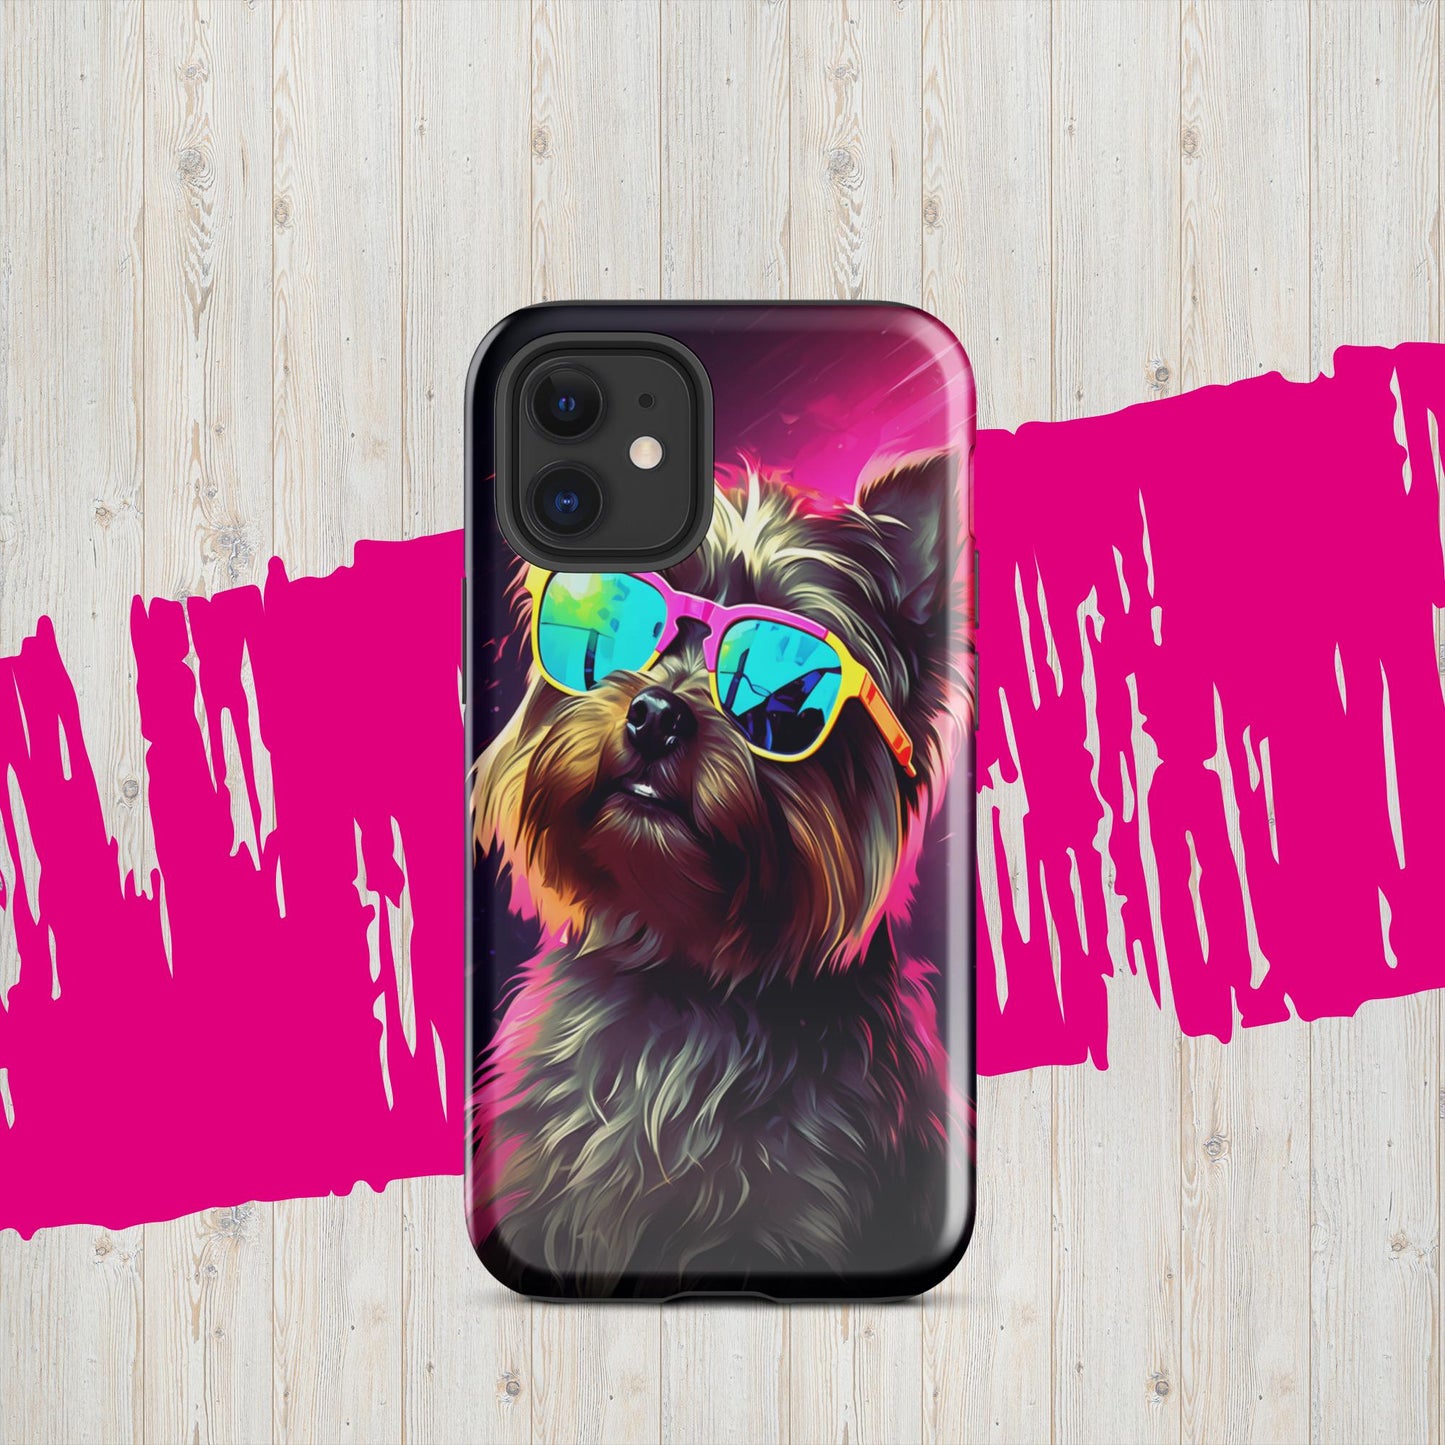 Tough Case for iPhone Tough Case, Shockproof Phone Case,Cool Designed Phone Cases, Pocket-friendly